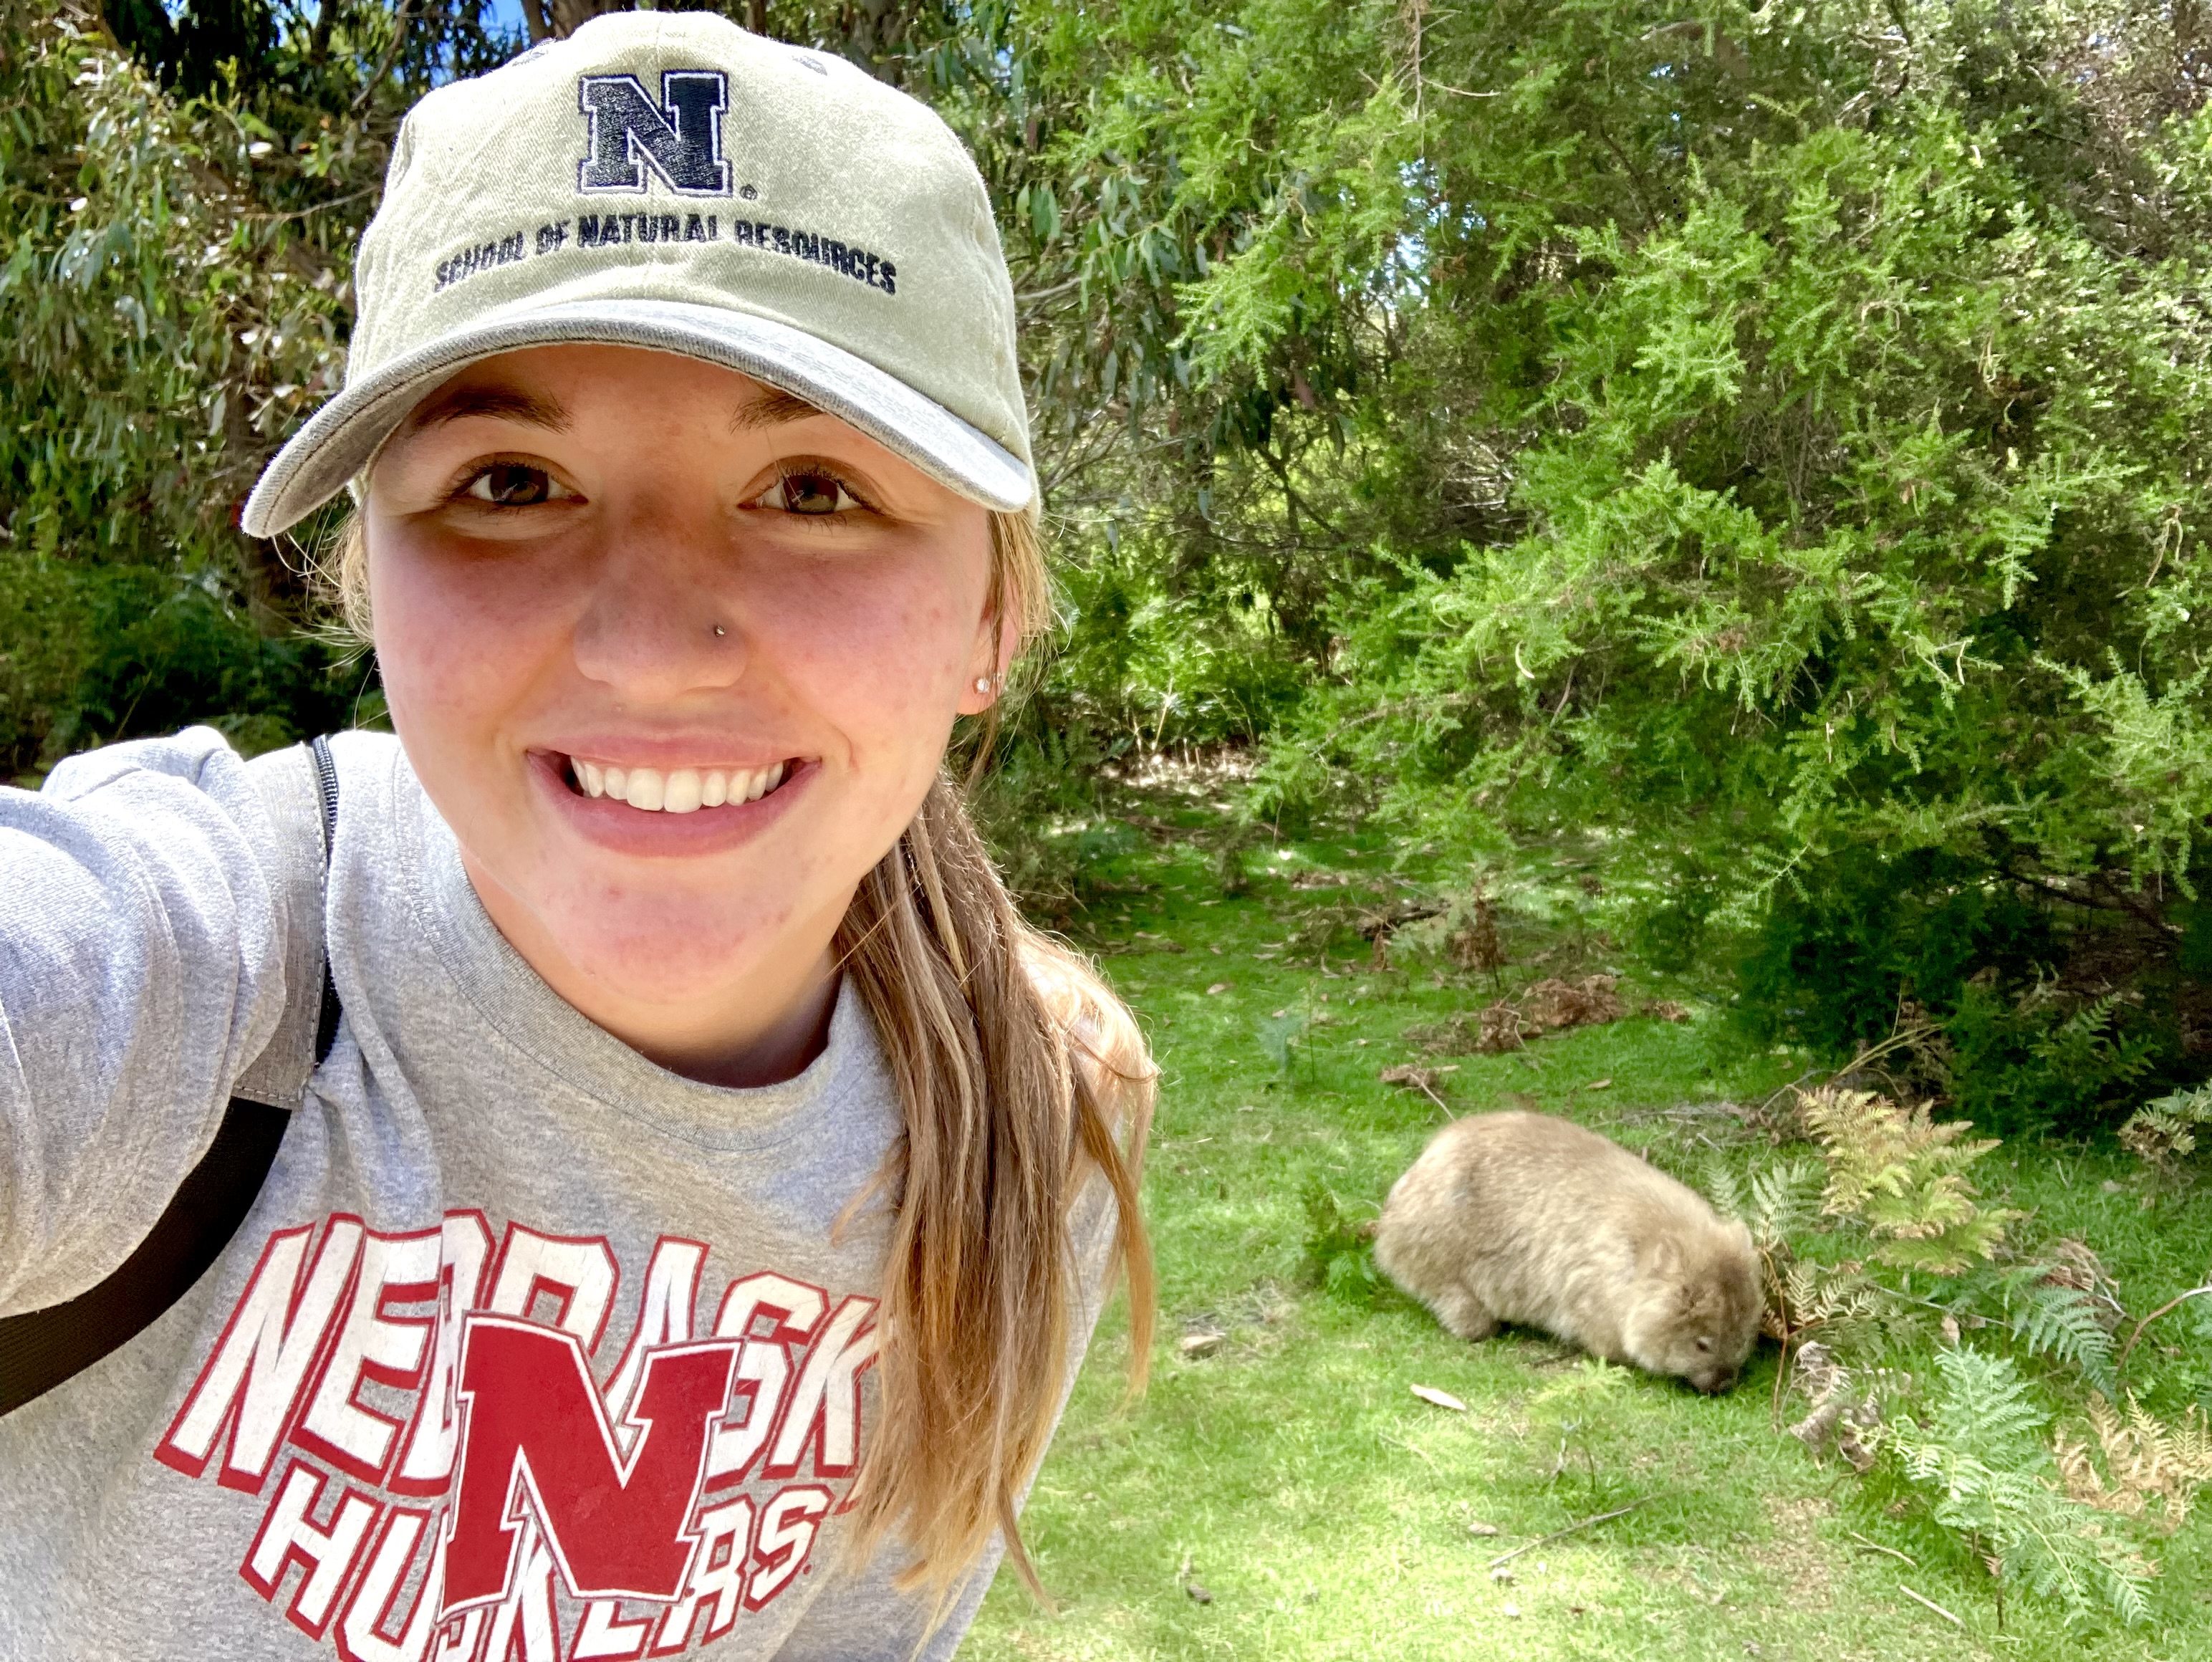 Brooke Mott, the new Recruitment and Retention Coordinator, Graduate Programs, for the School of Natural Resources, earned both her master’s and bachelor's degrees from the University of Nebraska-Lincoln. 